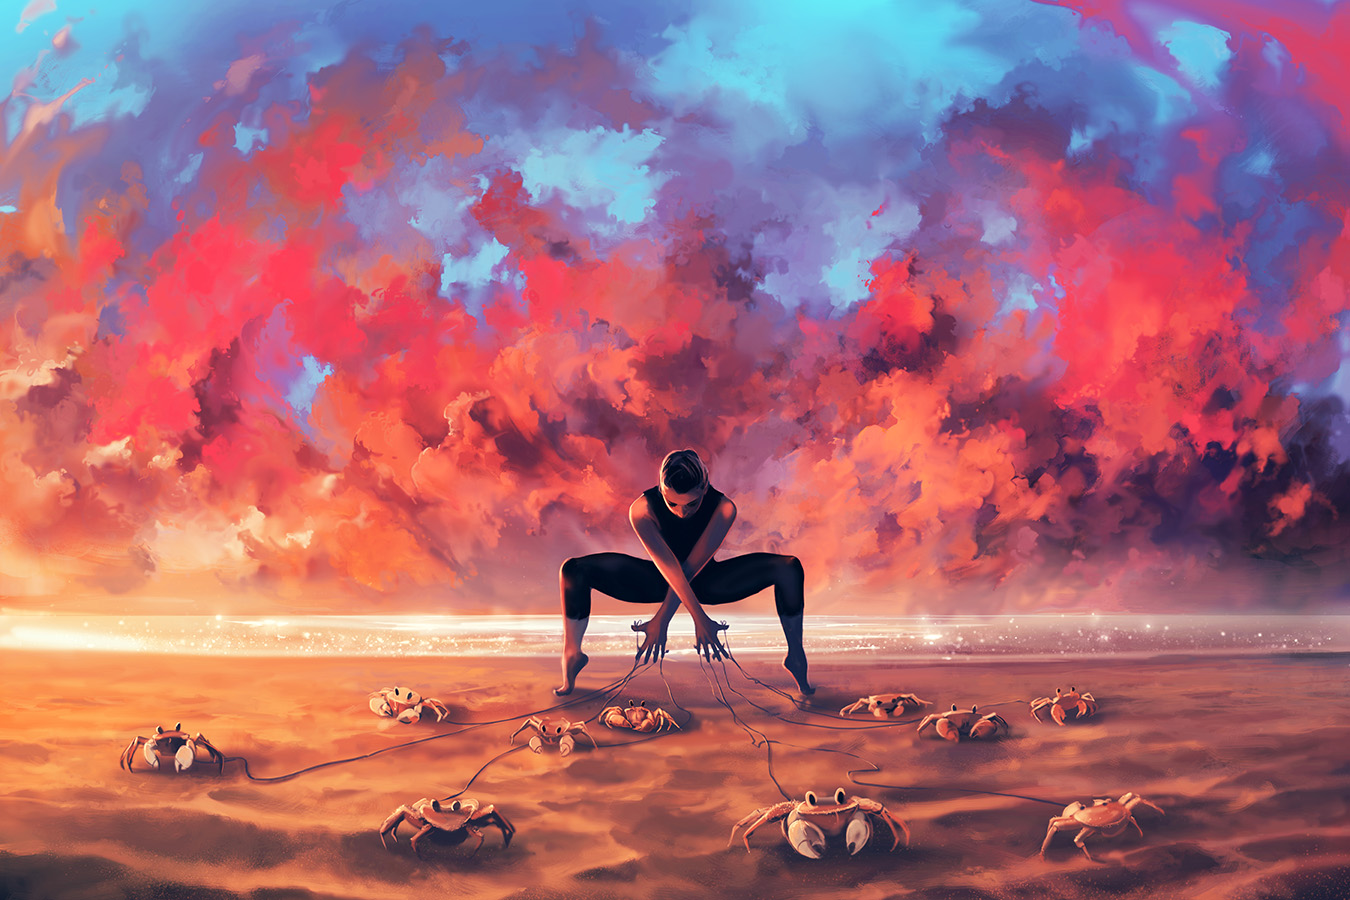 Cancer from the dancing zodiac by Cyril Rolando